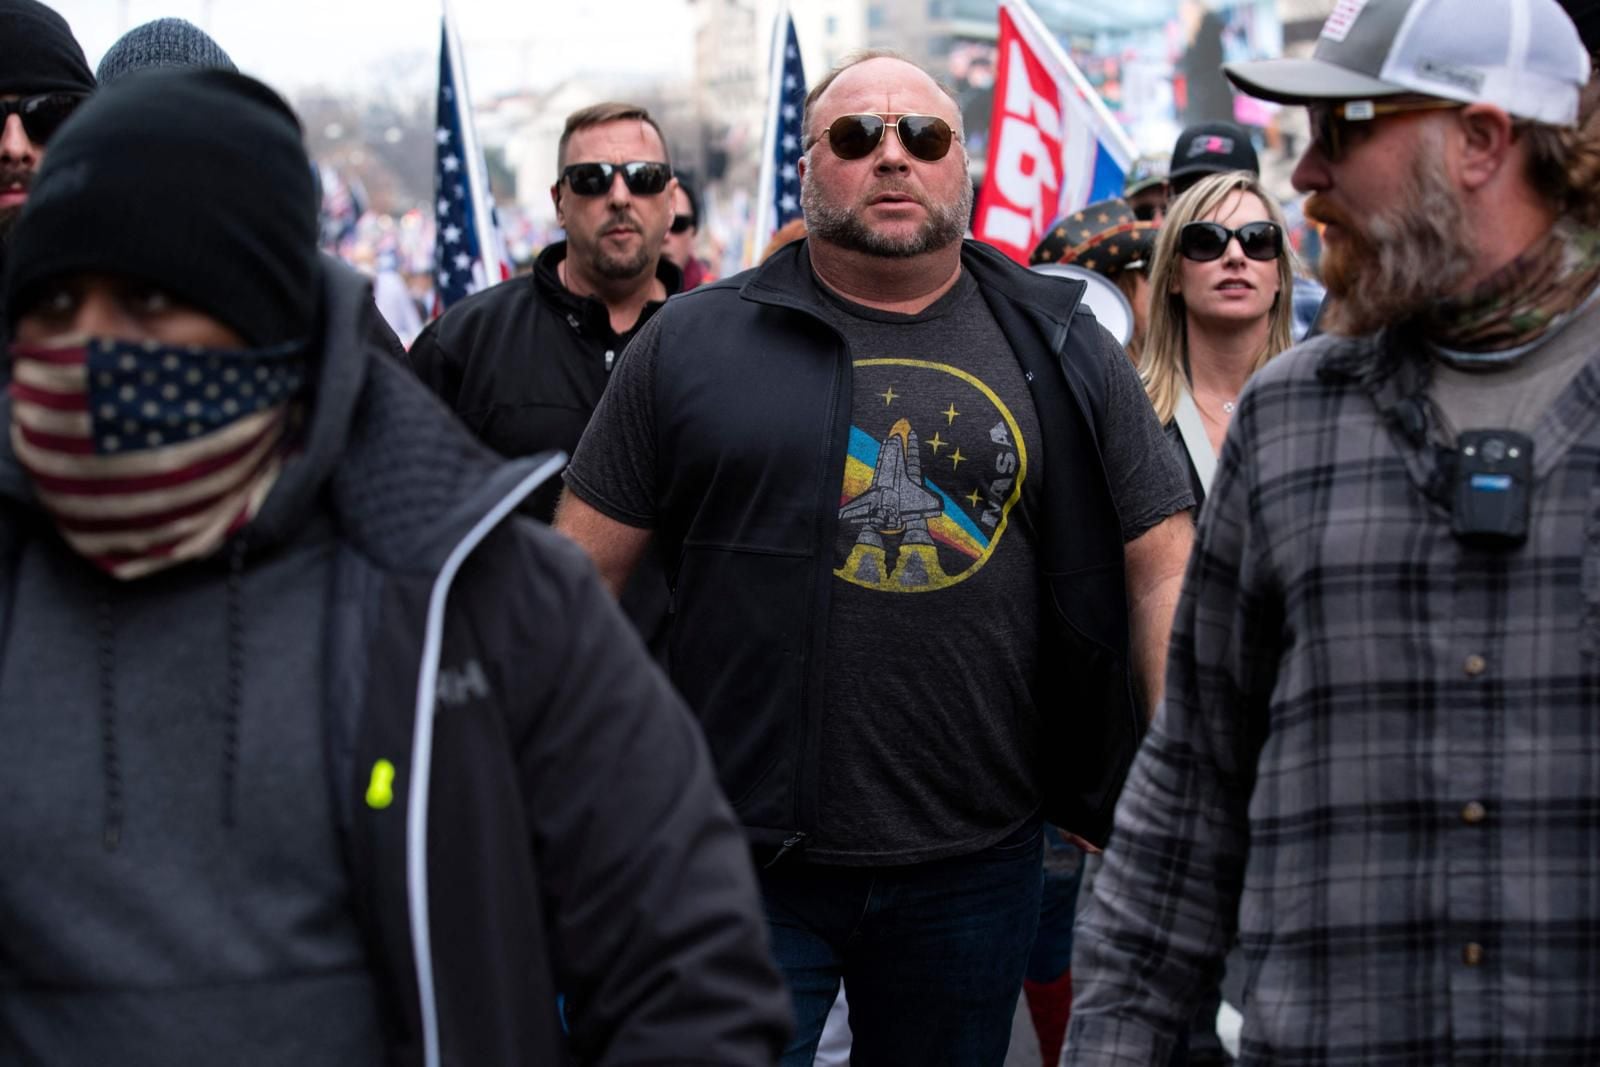 Jones has been associated with the most radical groups of the American extreme right. 